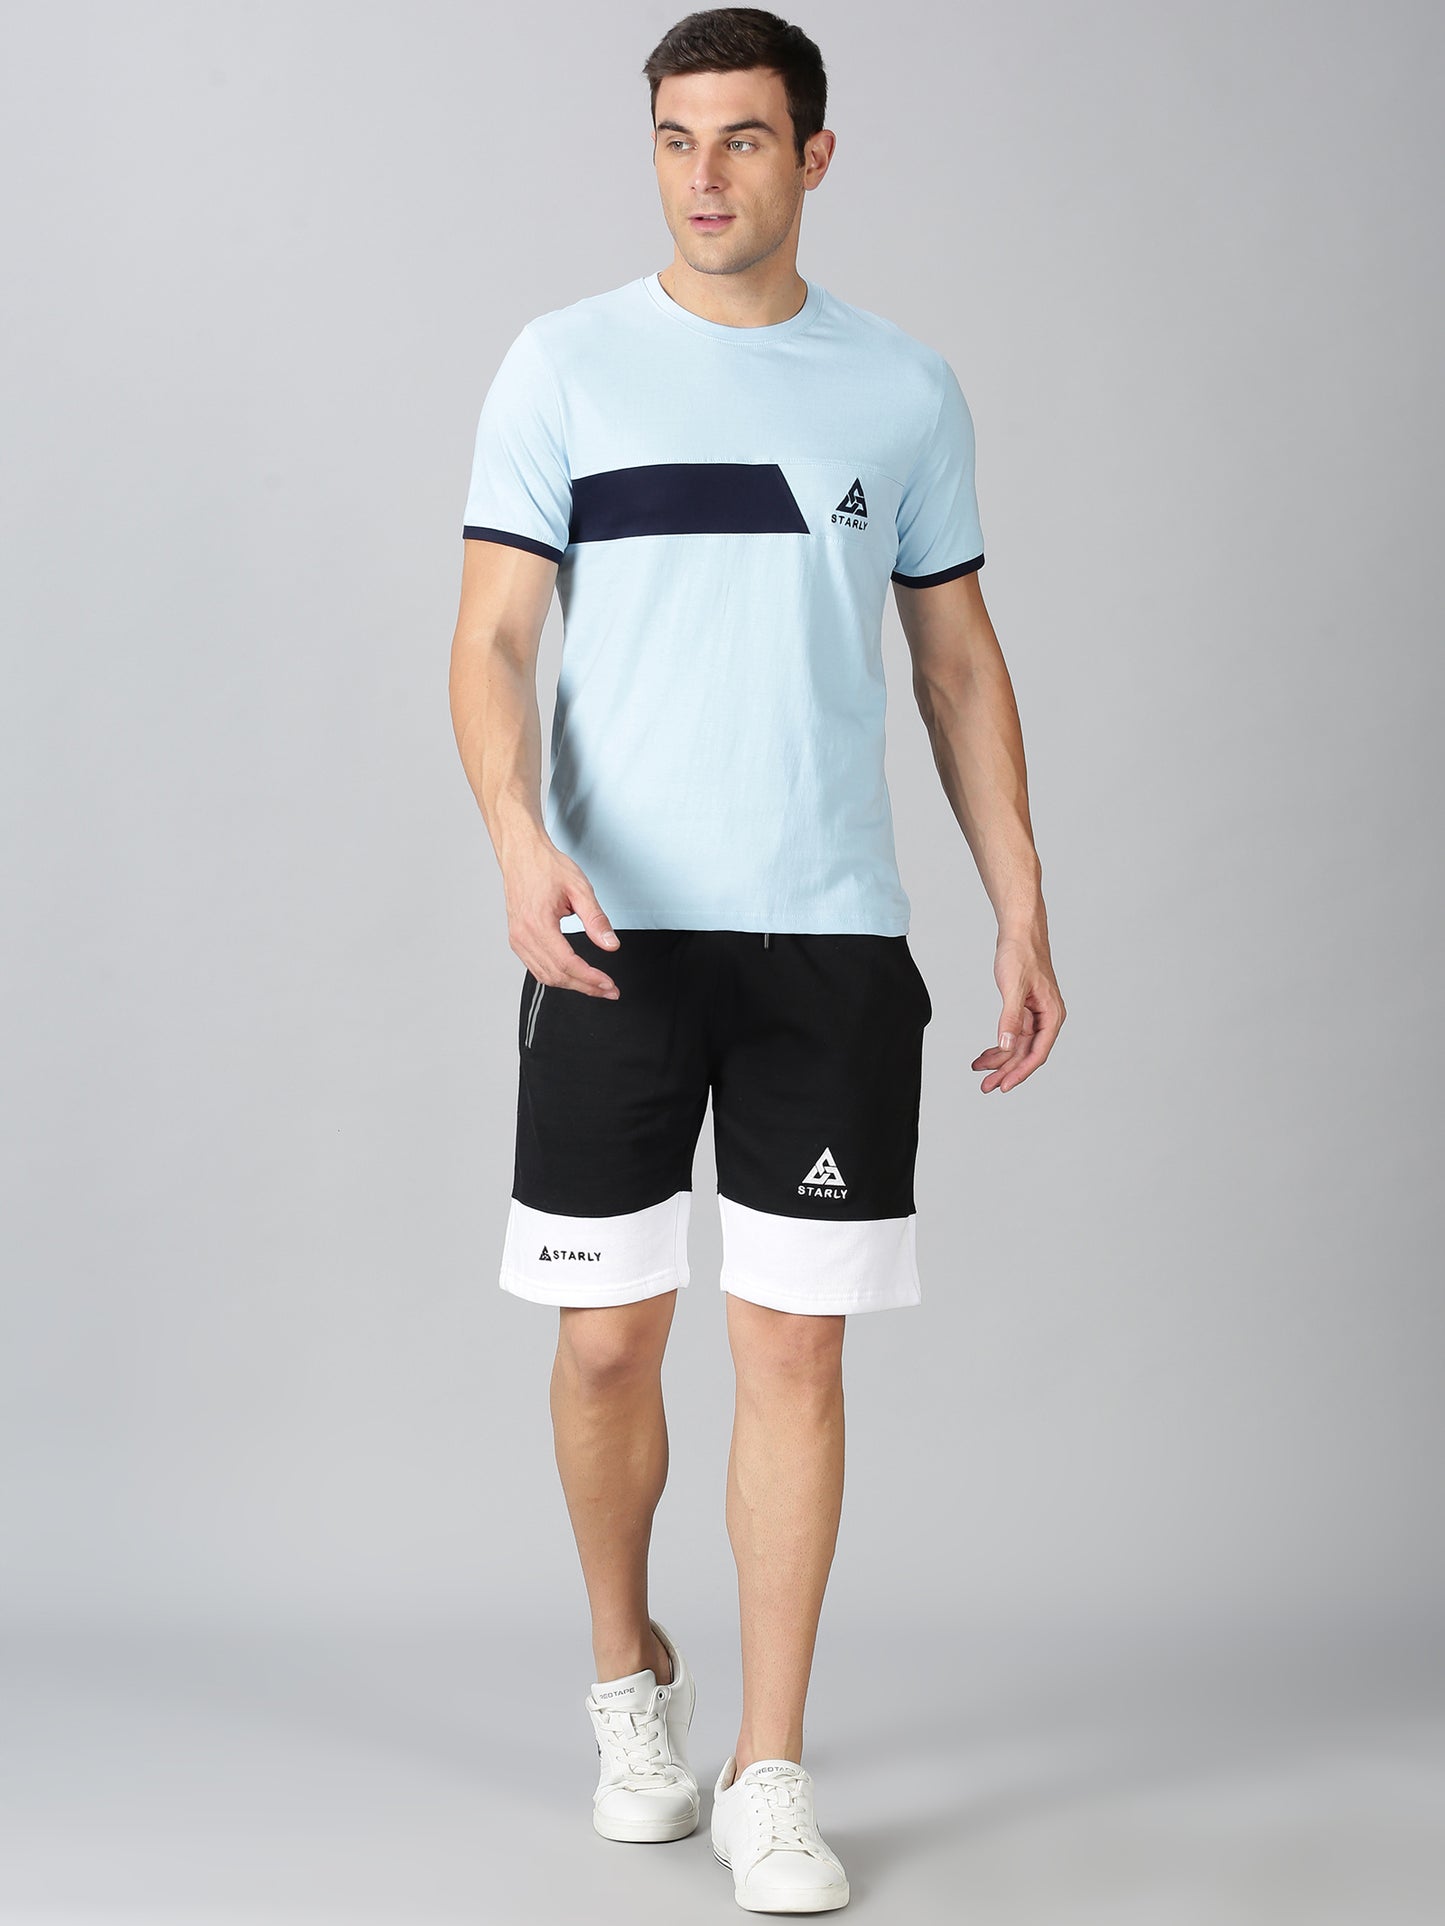 Trendy Sky-Blue T-shirt and Shorts Combo